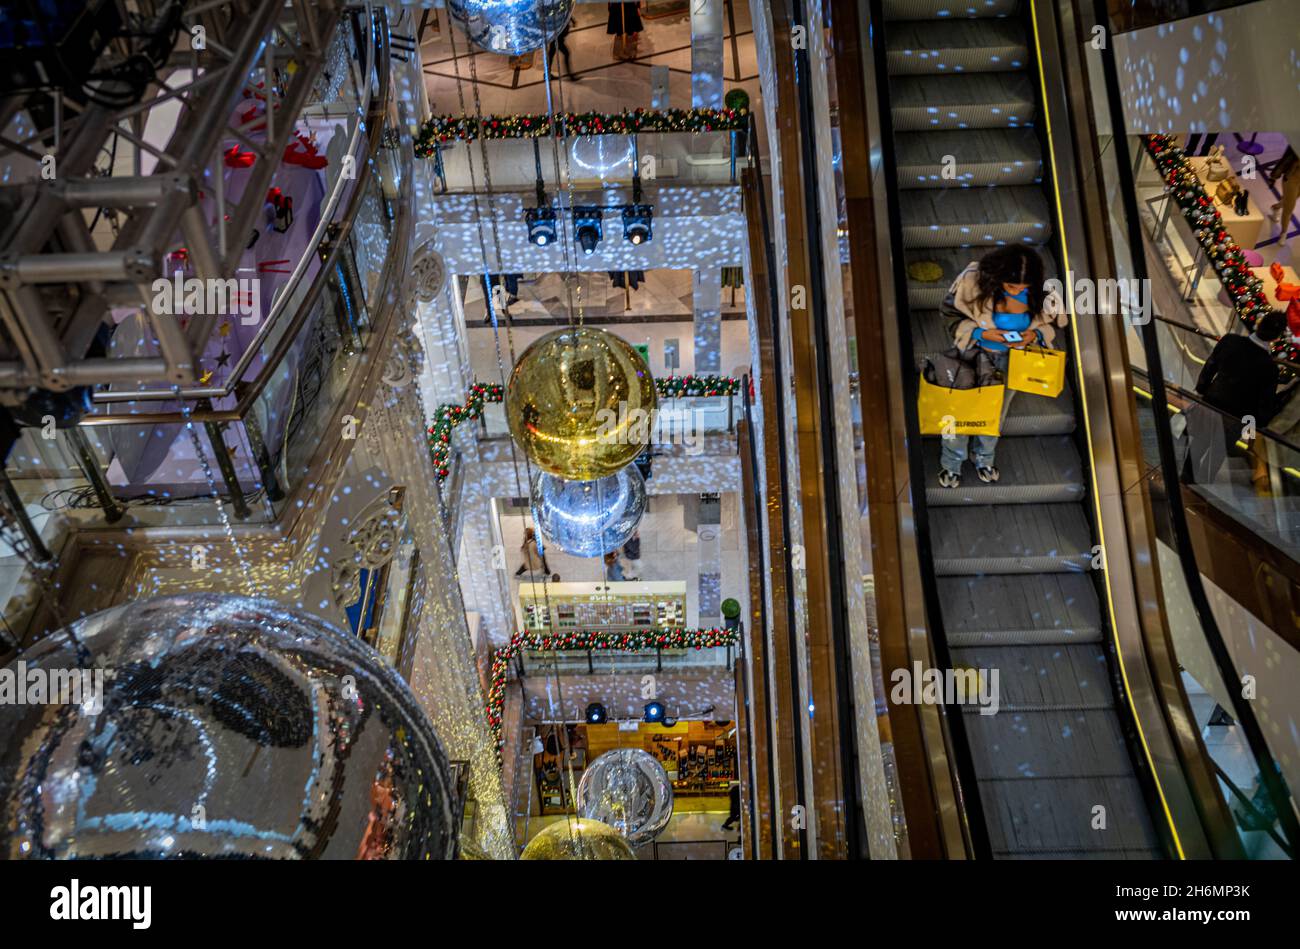 A woman shopper on the escalator in Selfridges Department Store in Oxford Street, London, UK  at Christmas surrounded by huge decorations.  Selfridges Stock Photo